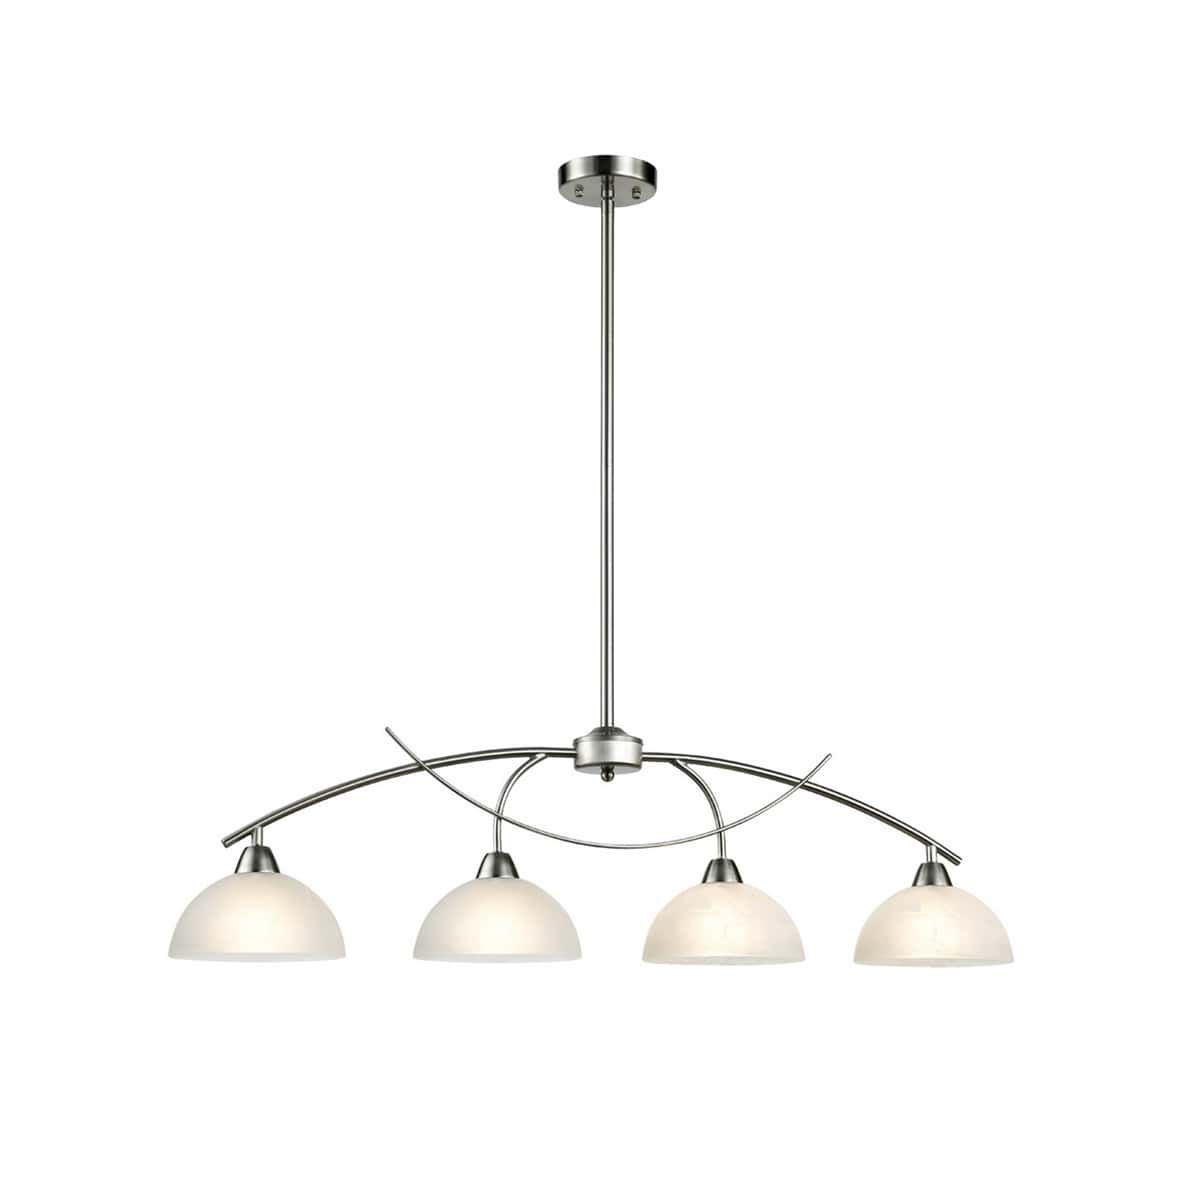 Modern 4 Light Kitchen Pendant Lighting, Brushed Nickel Pertaining To Best And Newest Brushed Nickel Metal And Wood Modern Chandeliers (View 12 of 15)